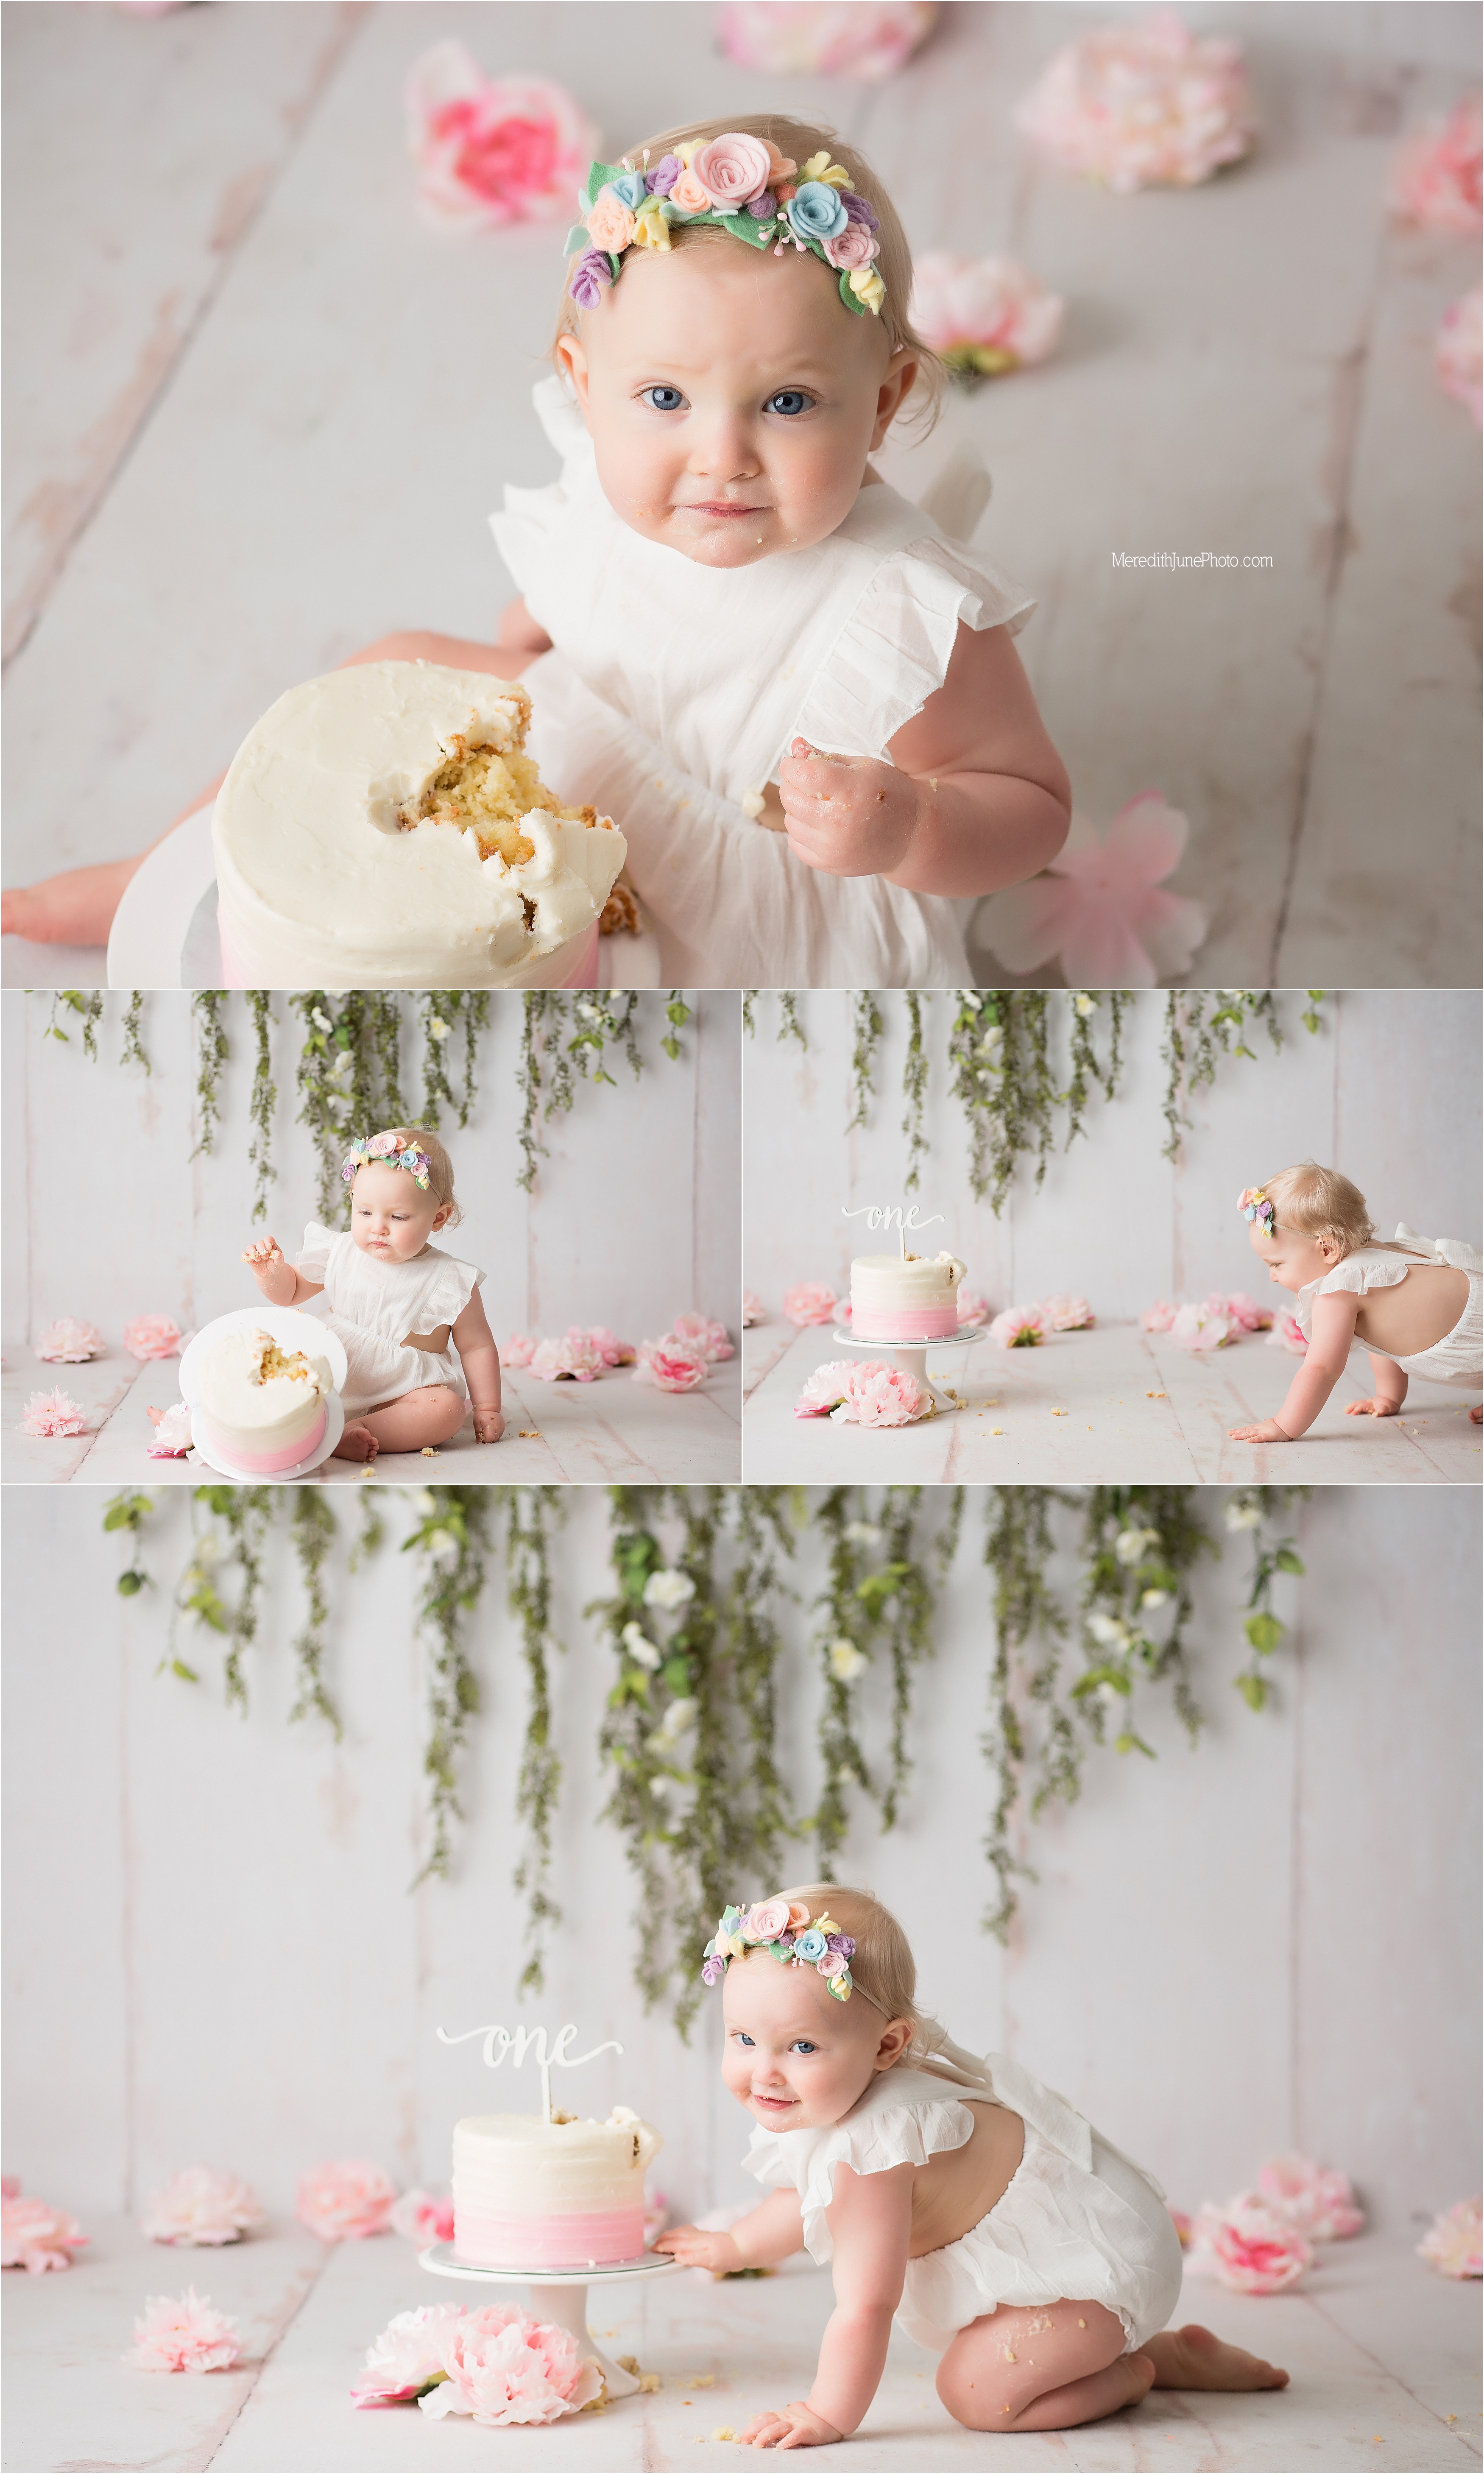 Adorable baby girl turns one at Meredith June Photography 